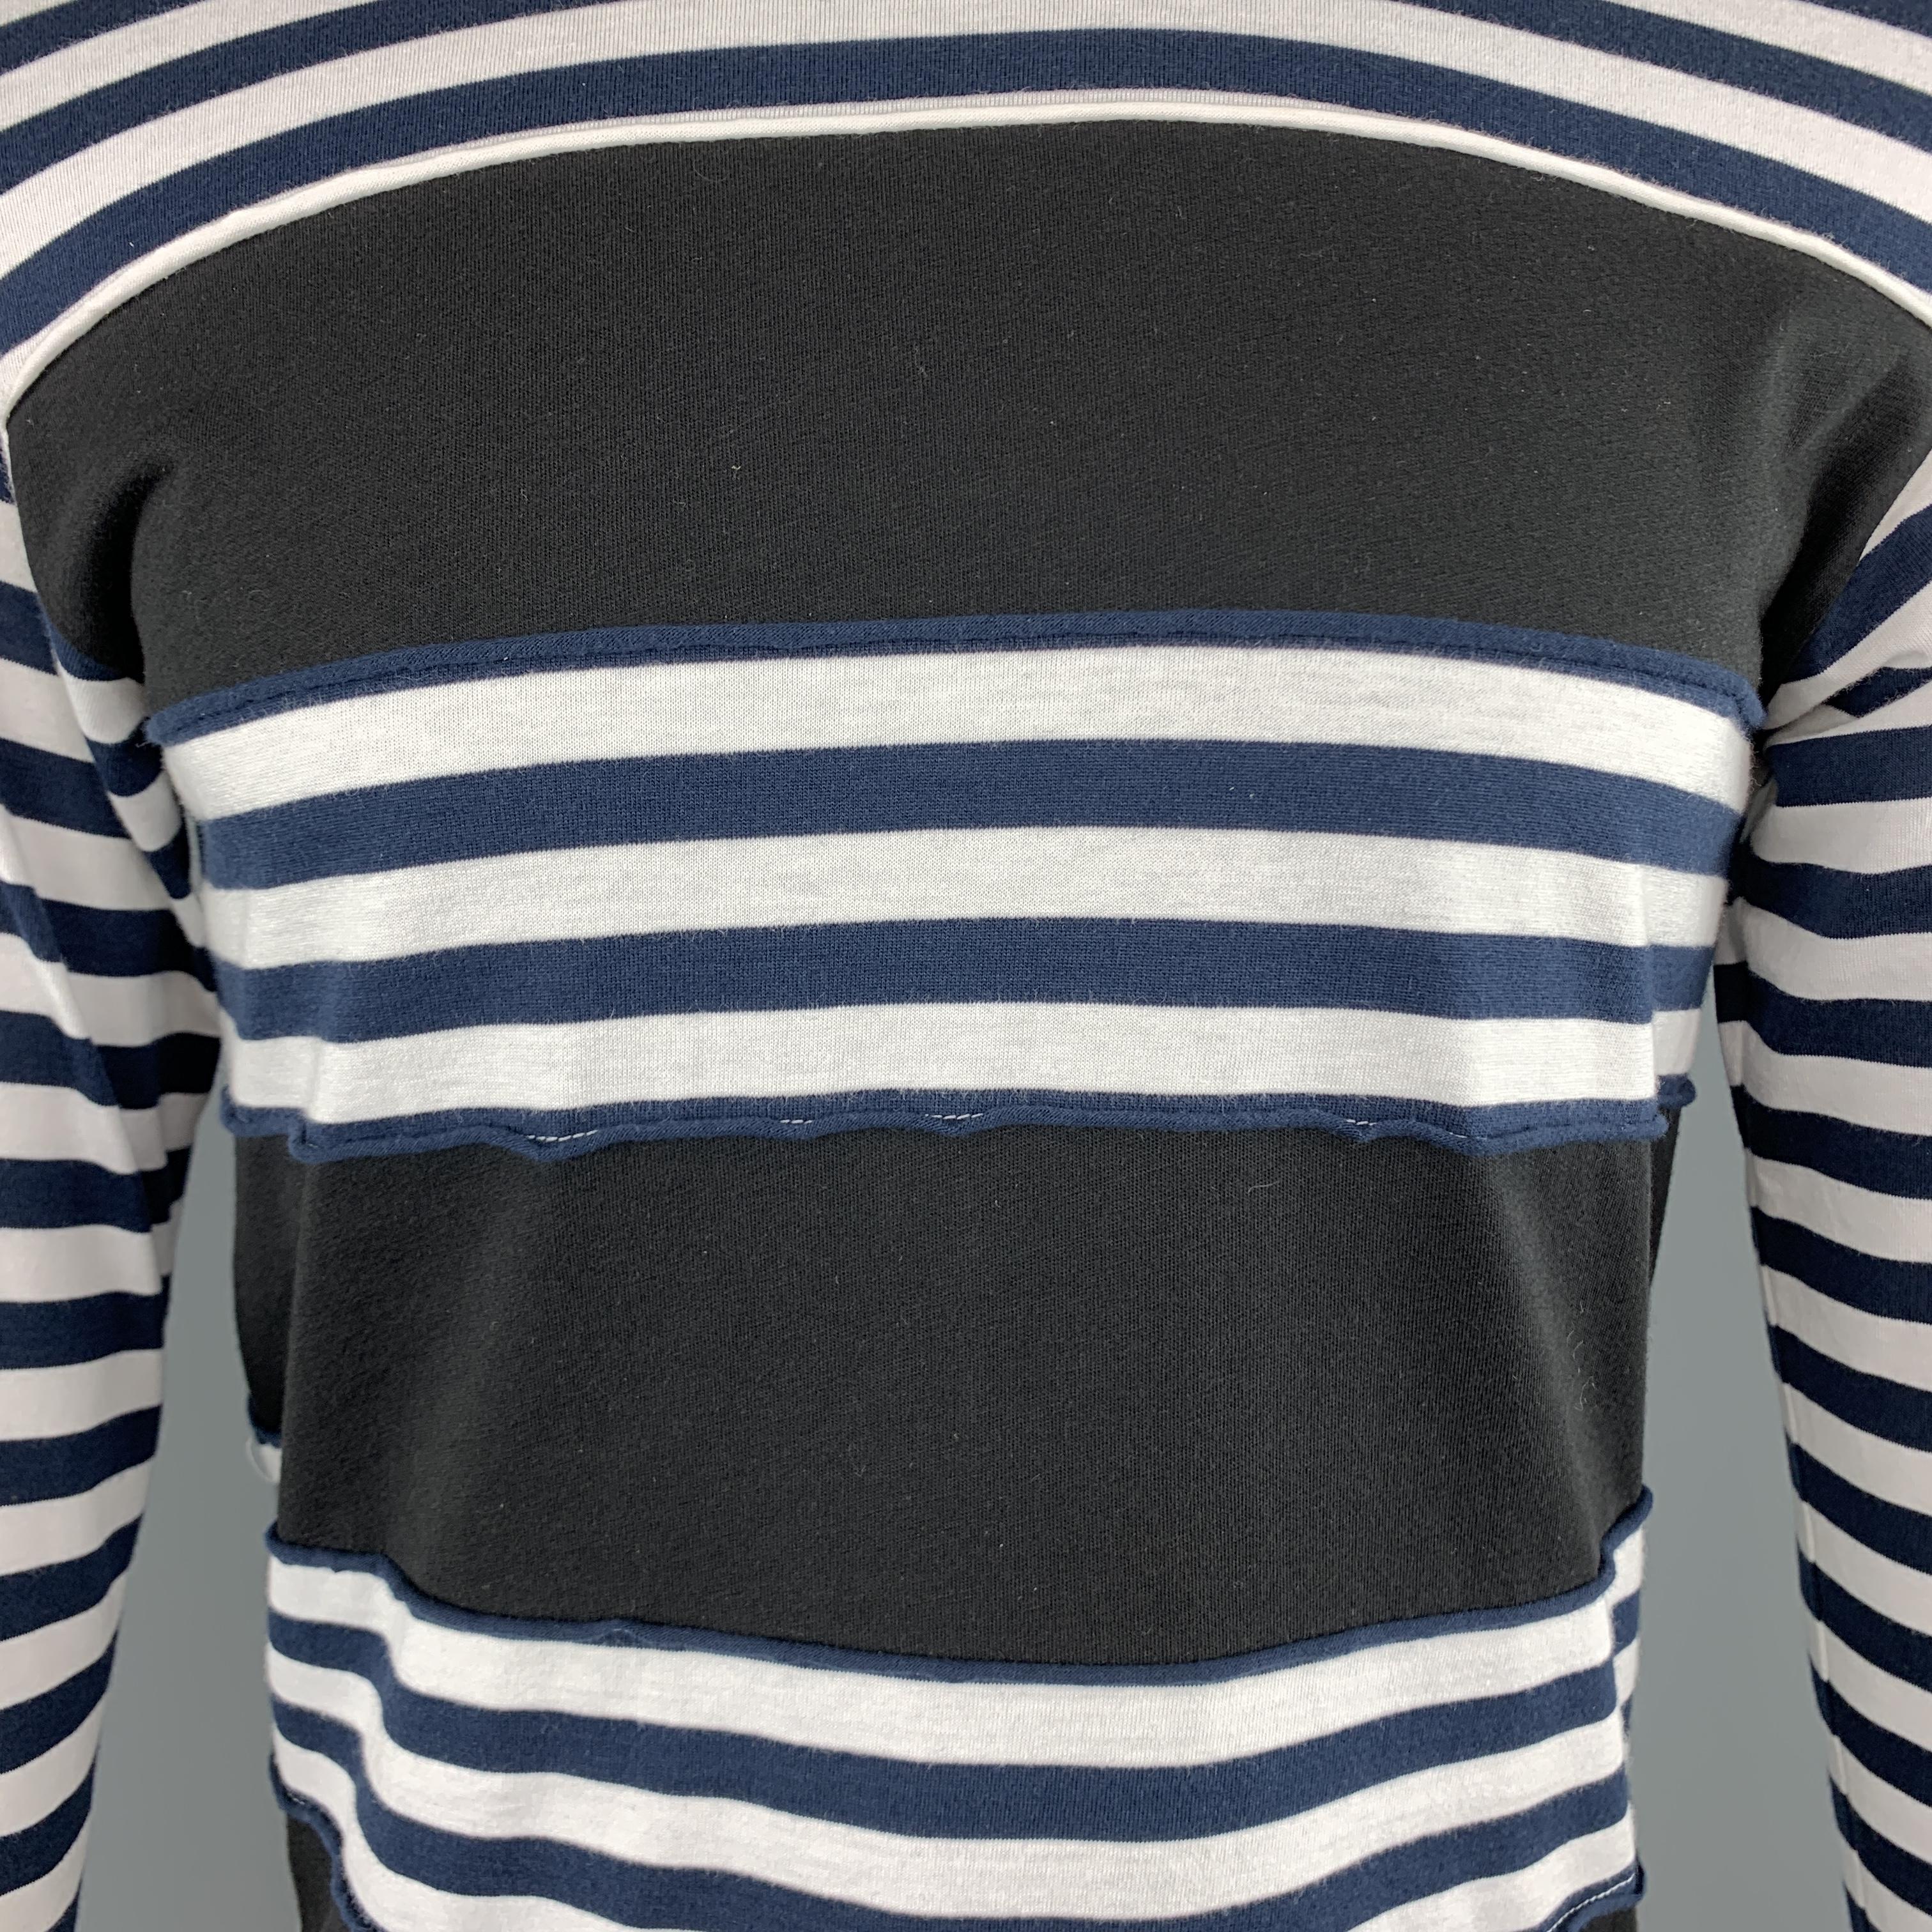 black and white striped long sleeve shirt